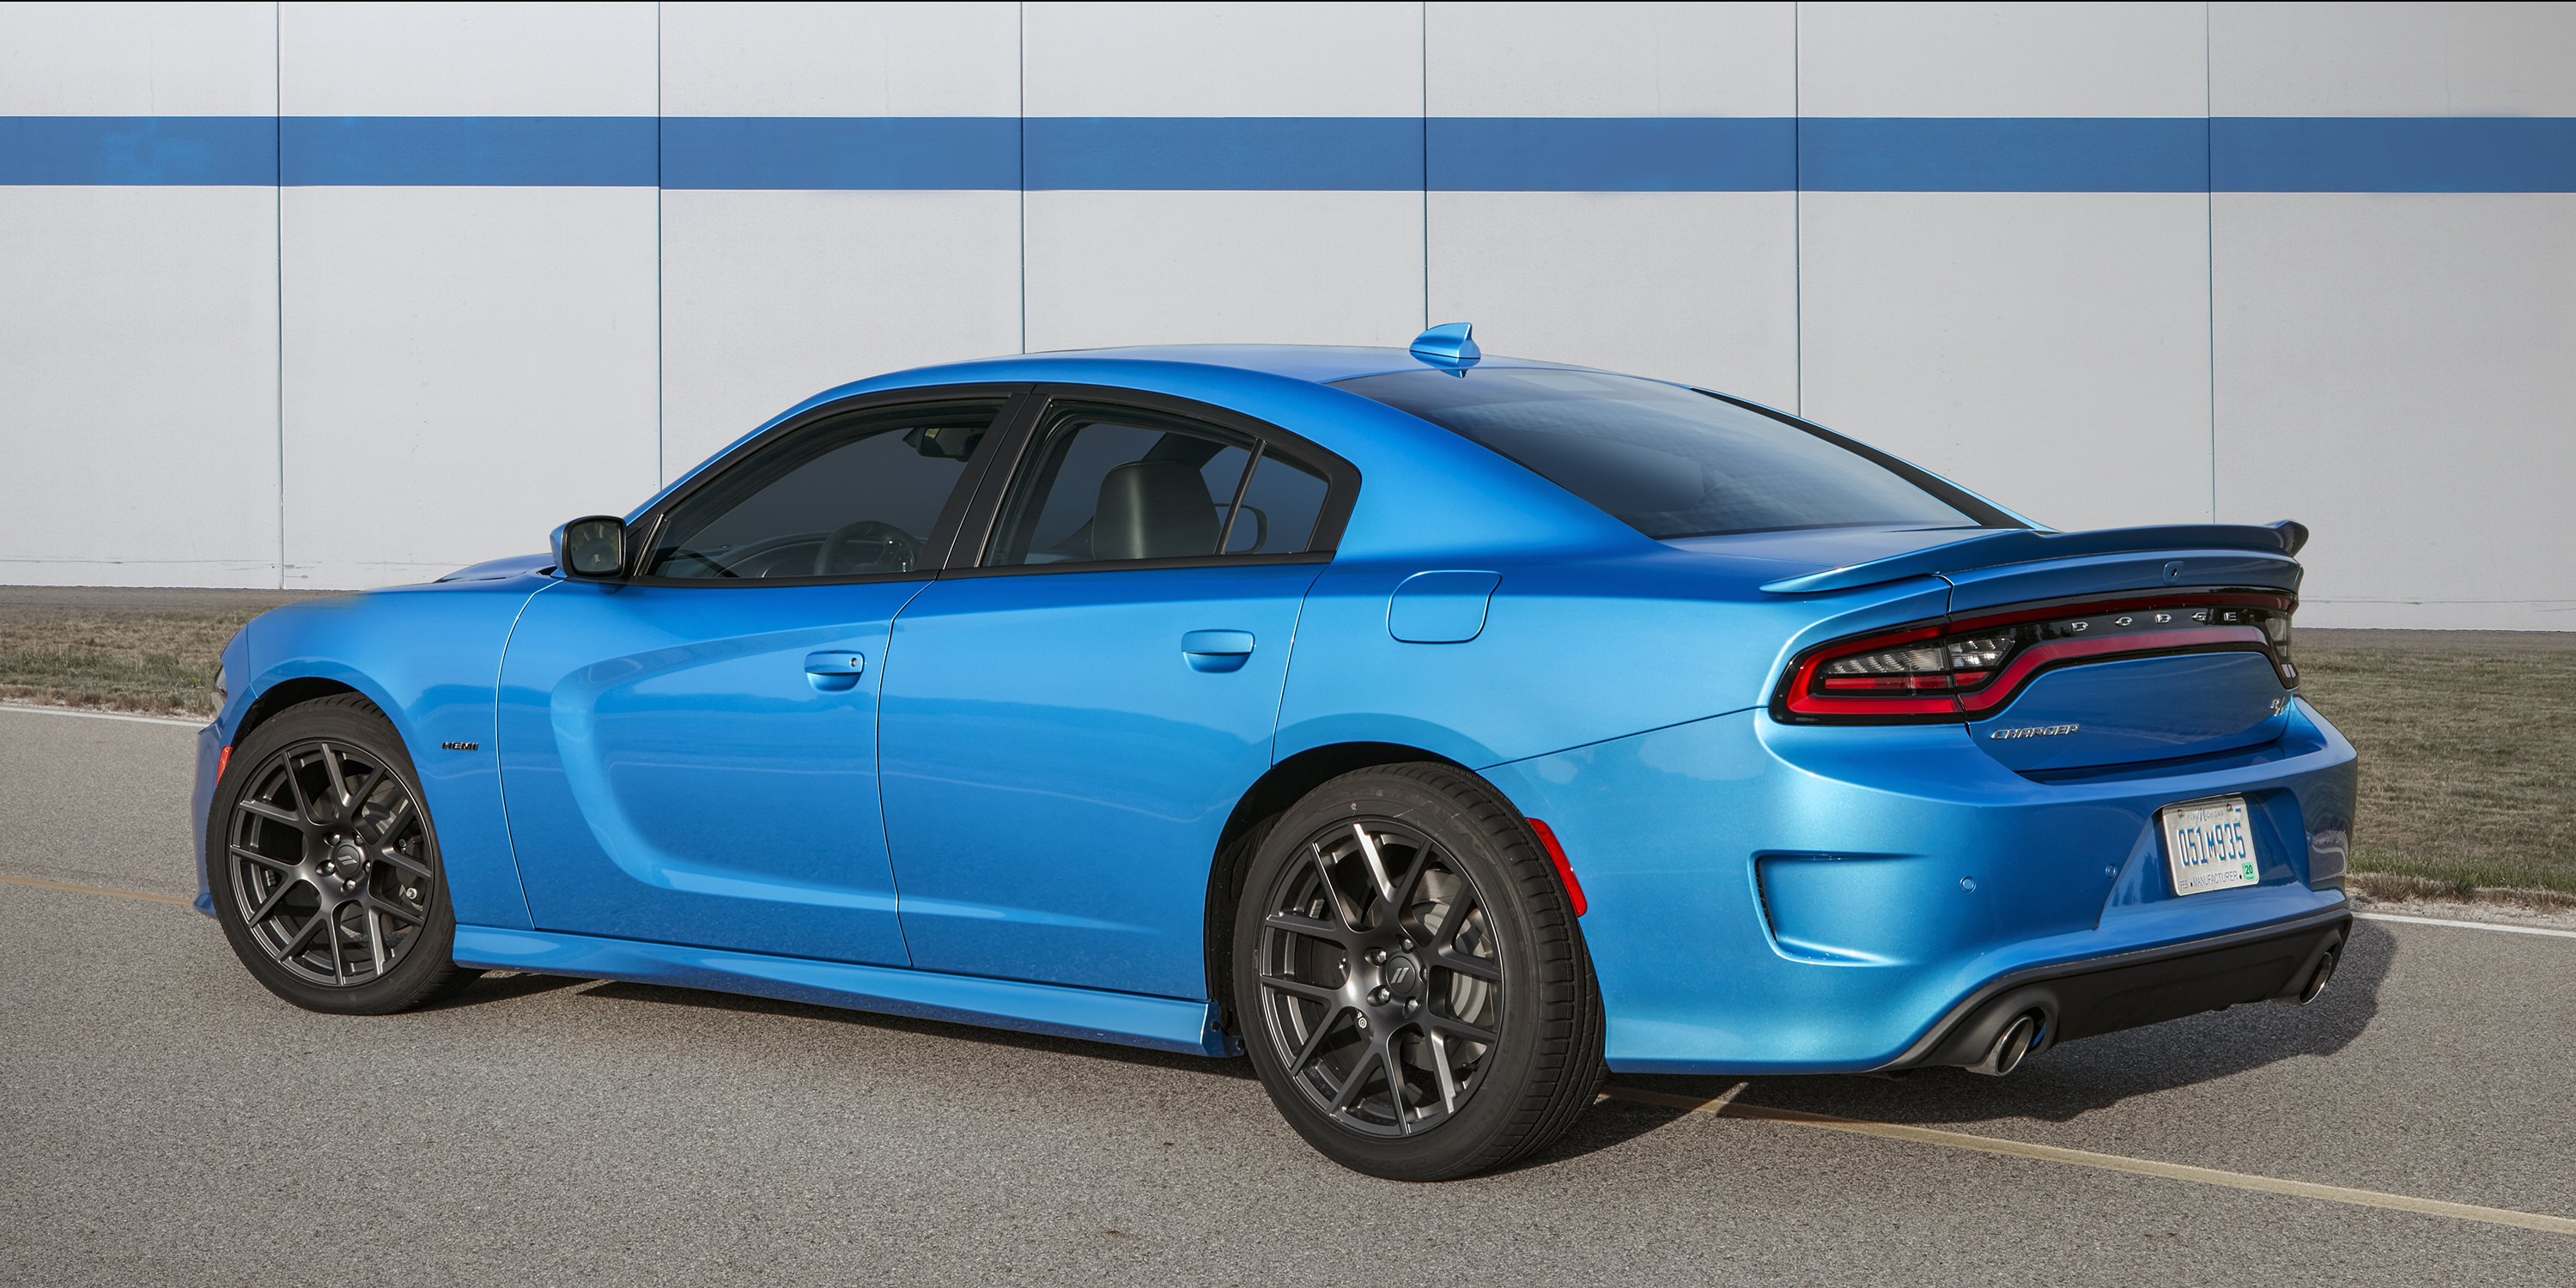 2019 Dodge Charger Rt Blacktop Specs - How Much?